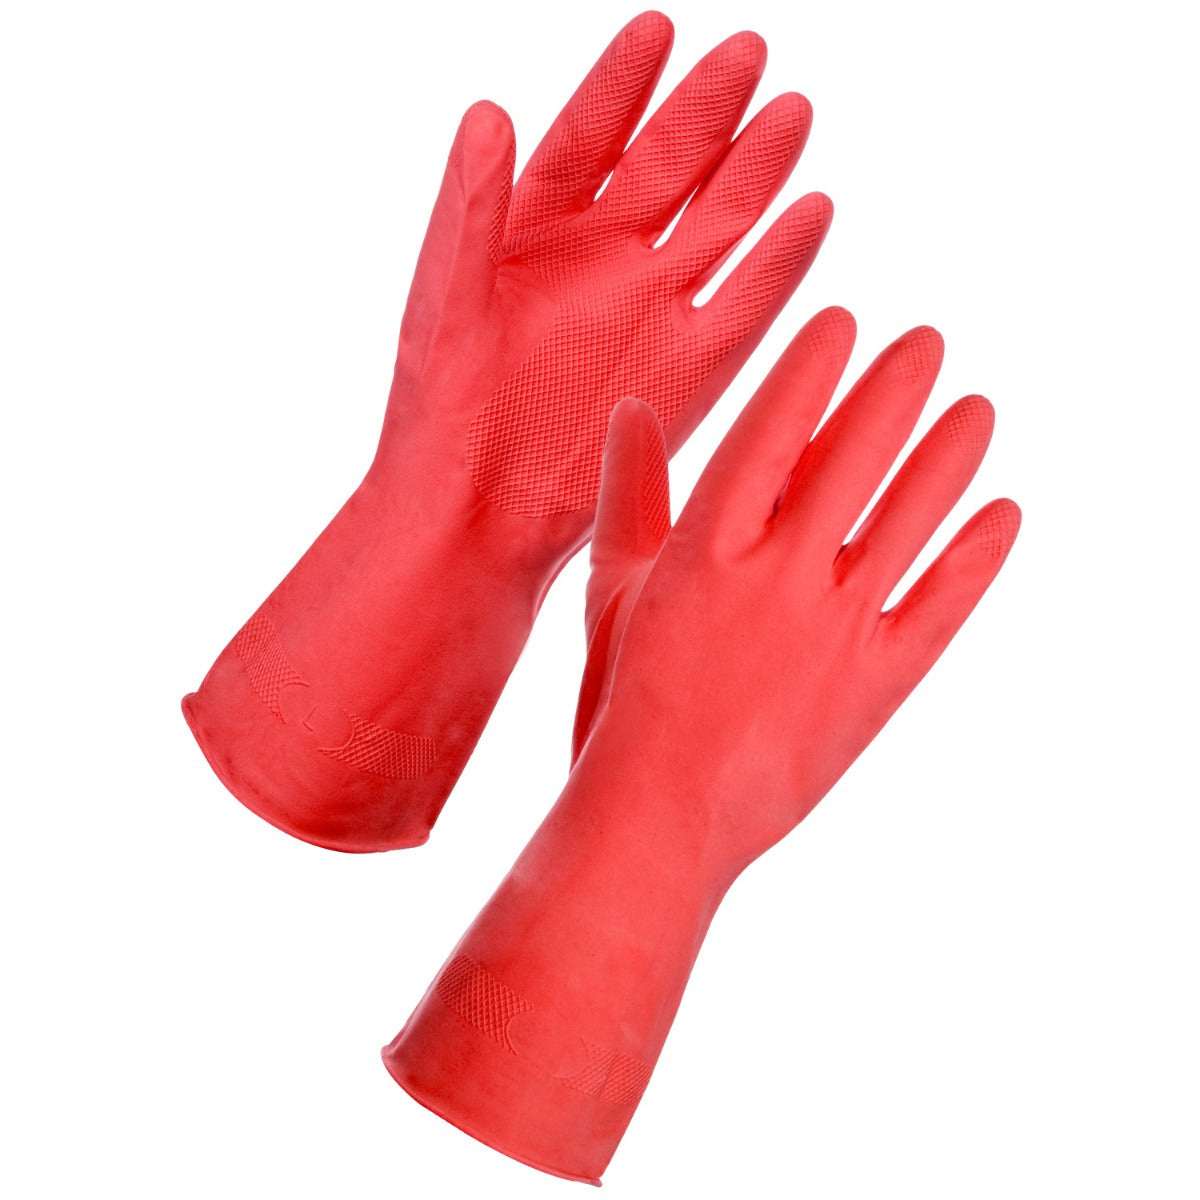 Purely Class Household Rubber Gloves Red Large x 1 pair